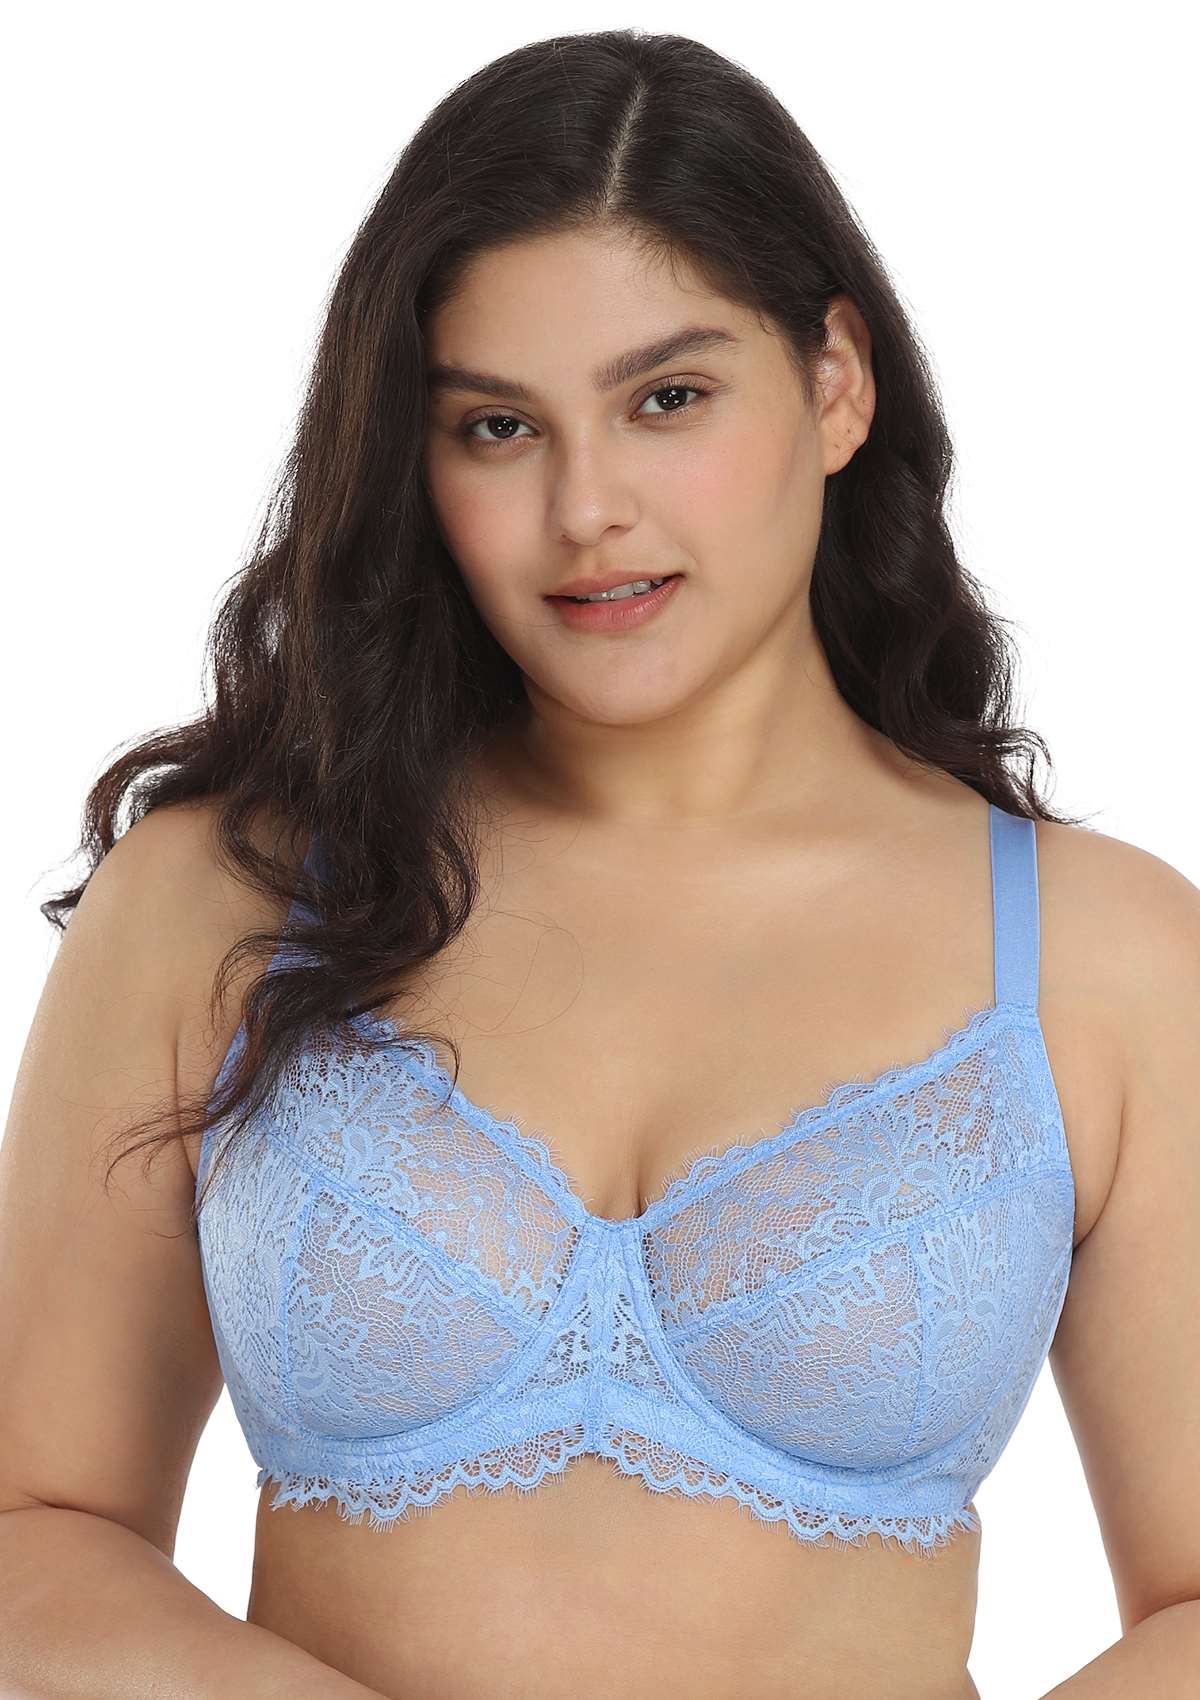 HSIA Sunflower Unlined Lace Bra: Best Bra For Wide Set Breasts - Sky Blue / 38 / I